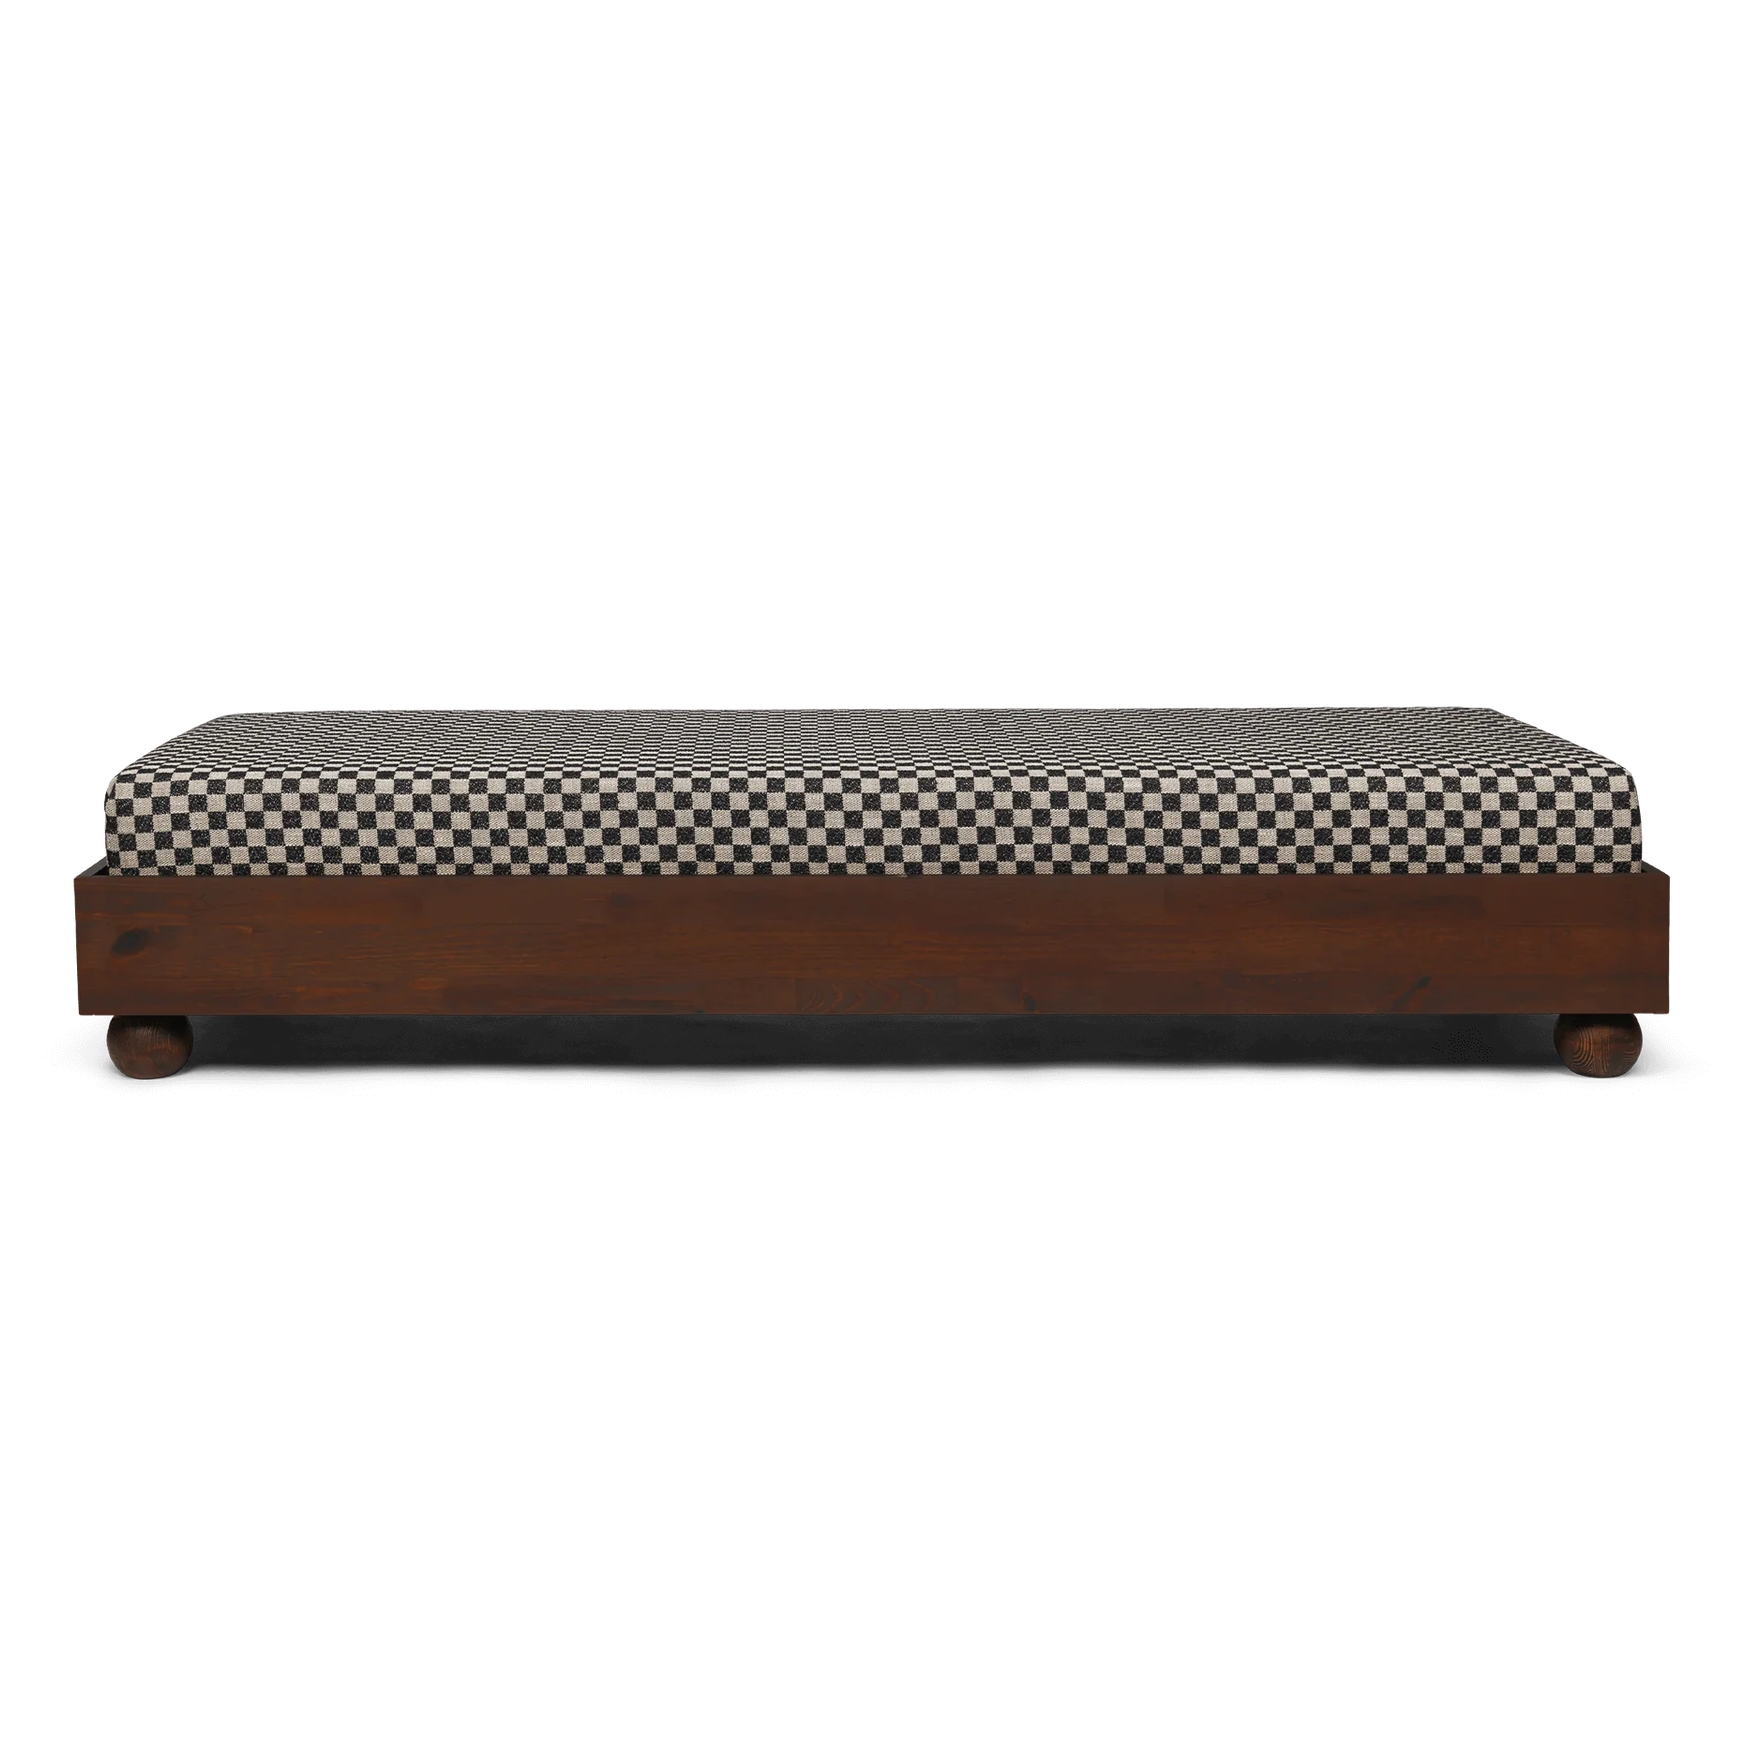 Rum Daybed Check – Dark Stained/Sand/Black